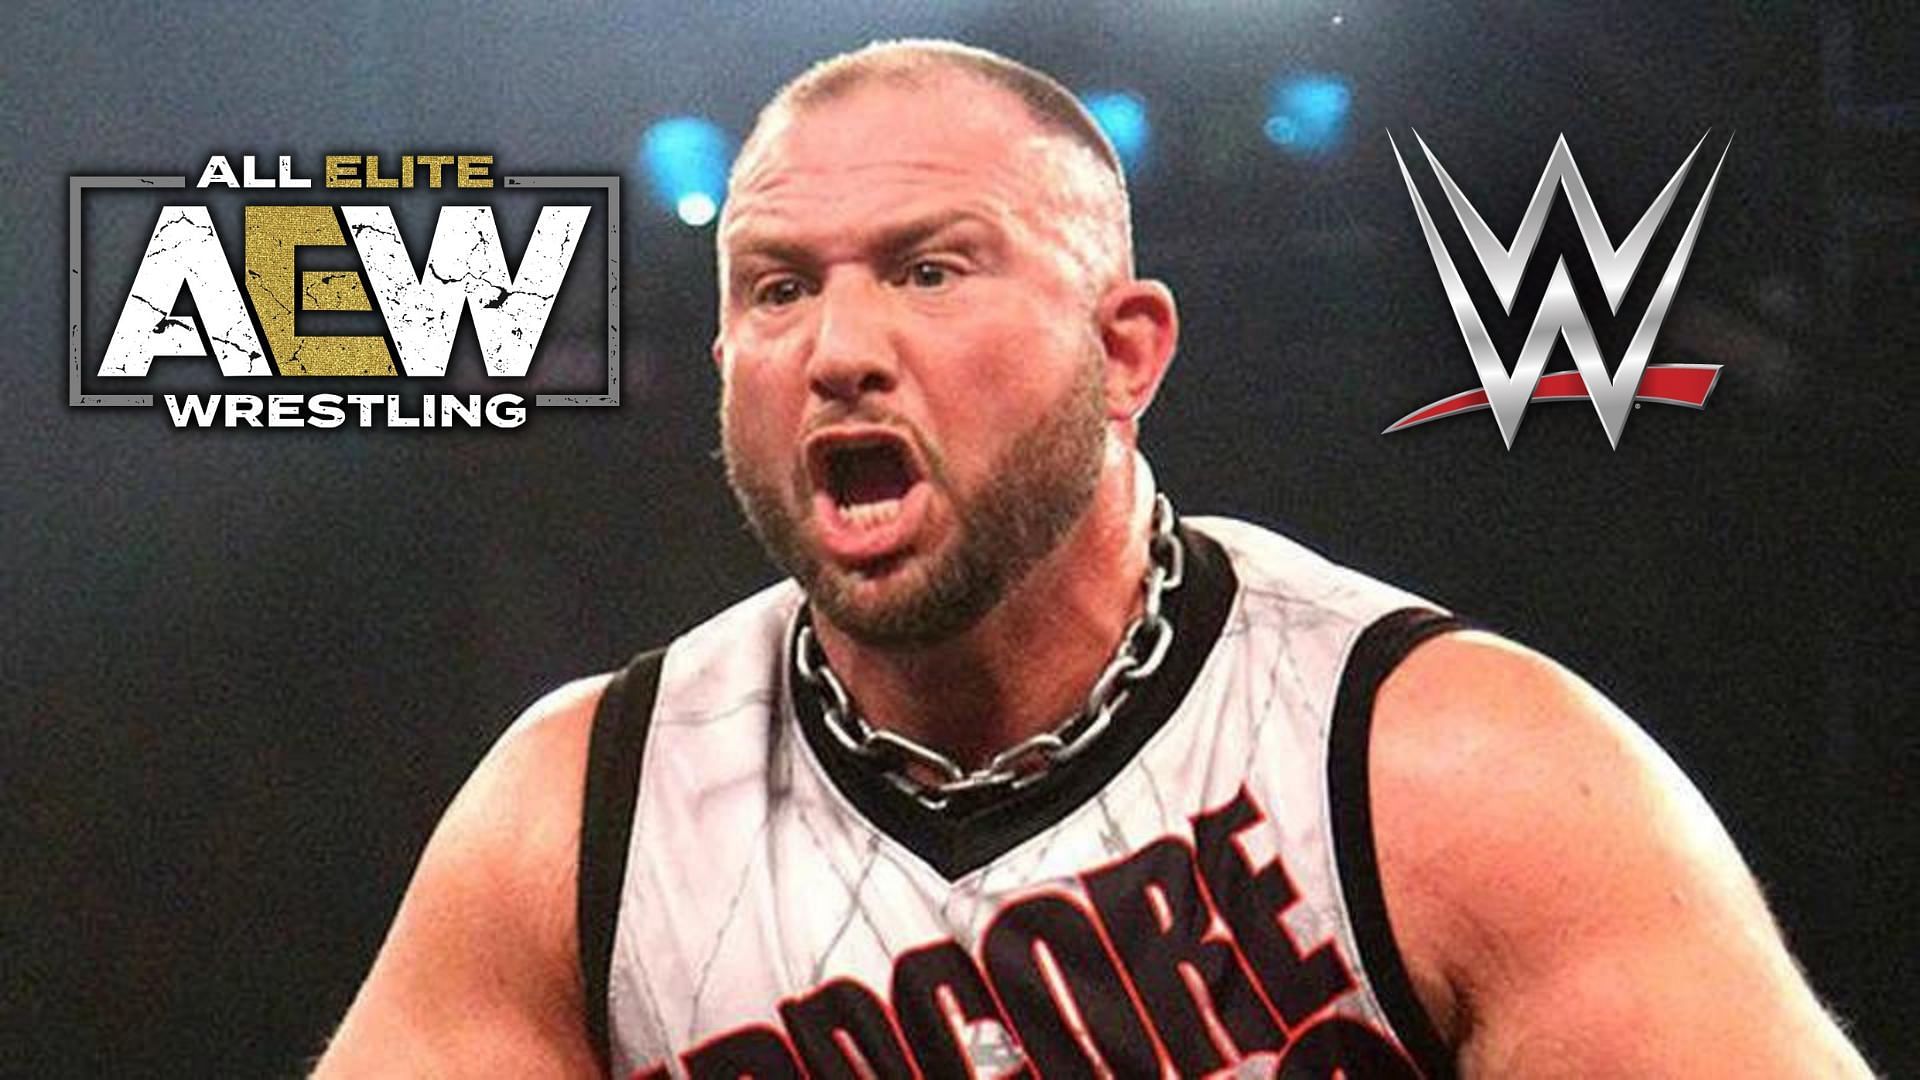 Bully Ray had some interesting comments this week